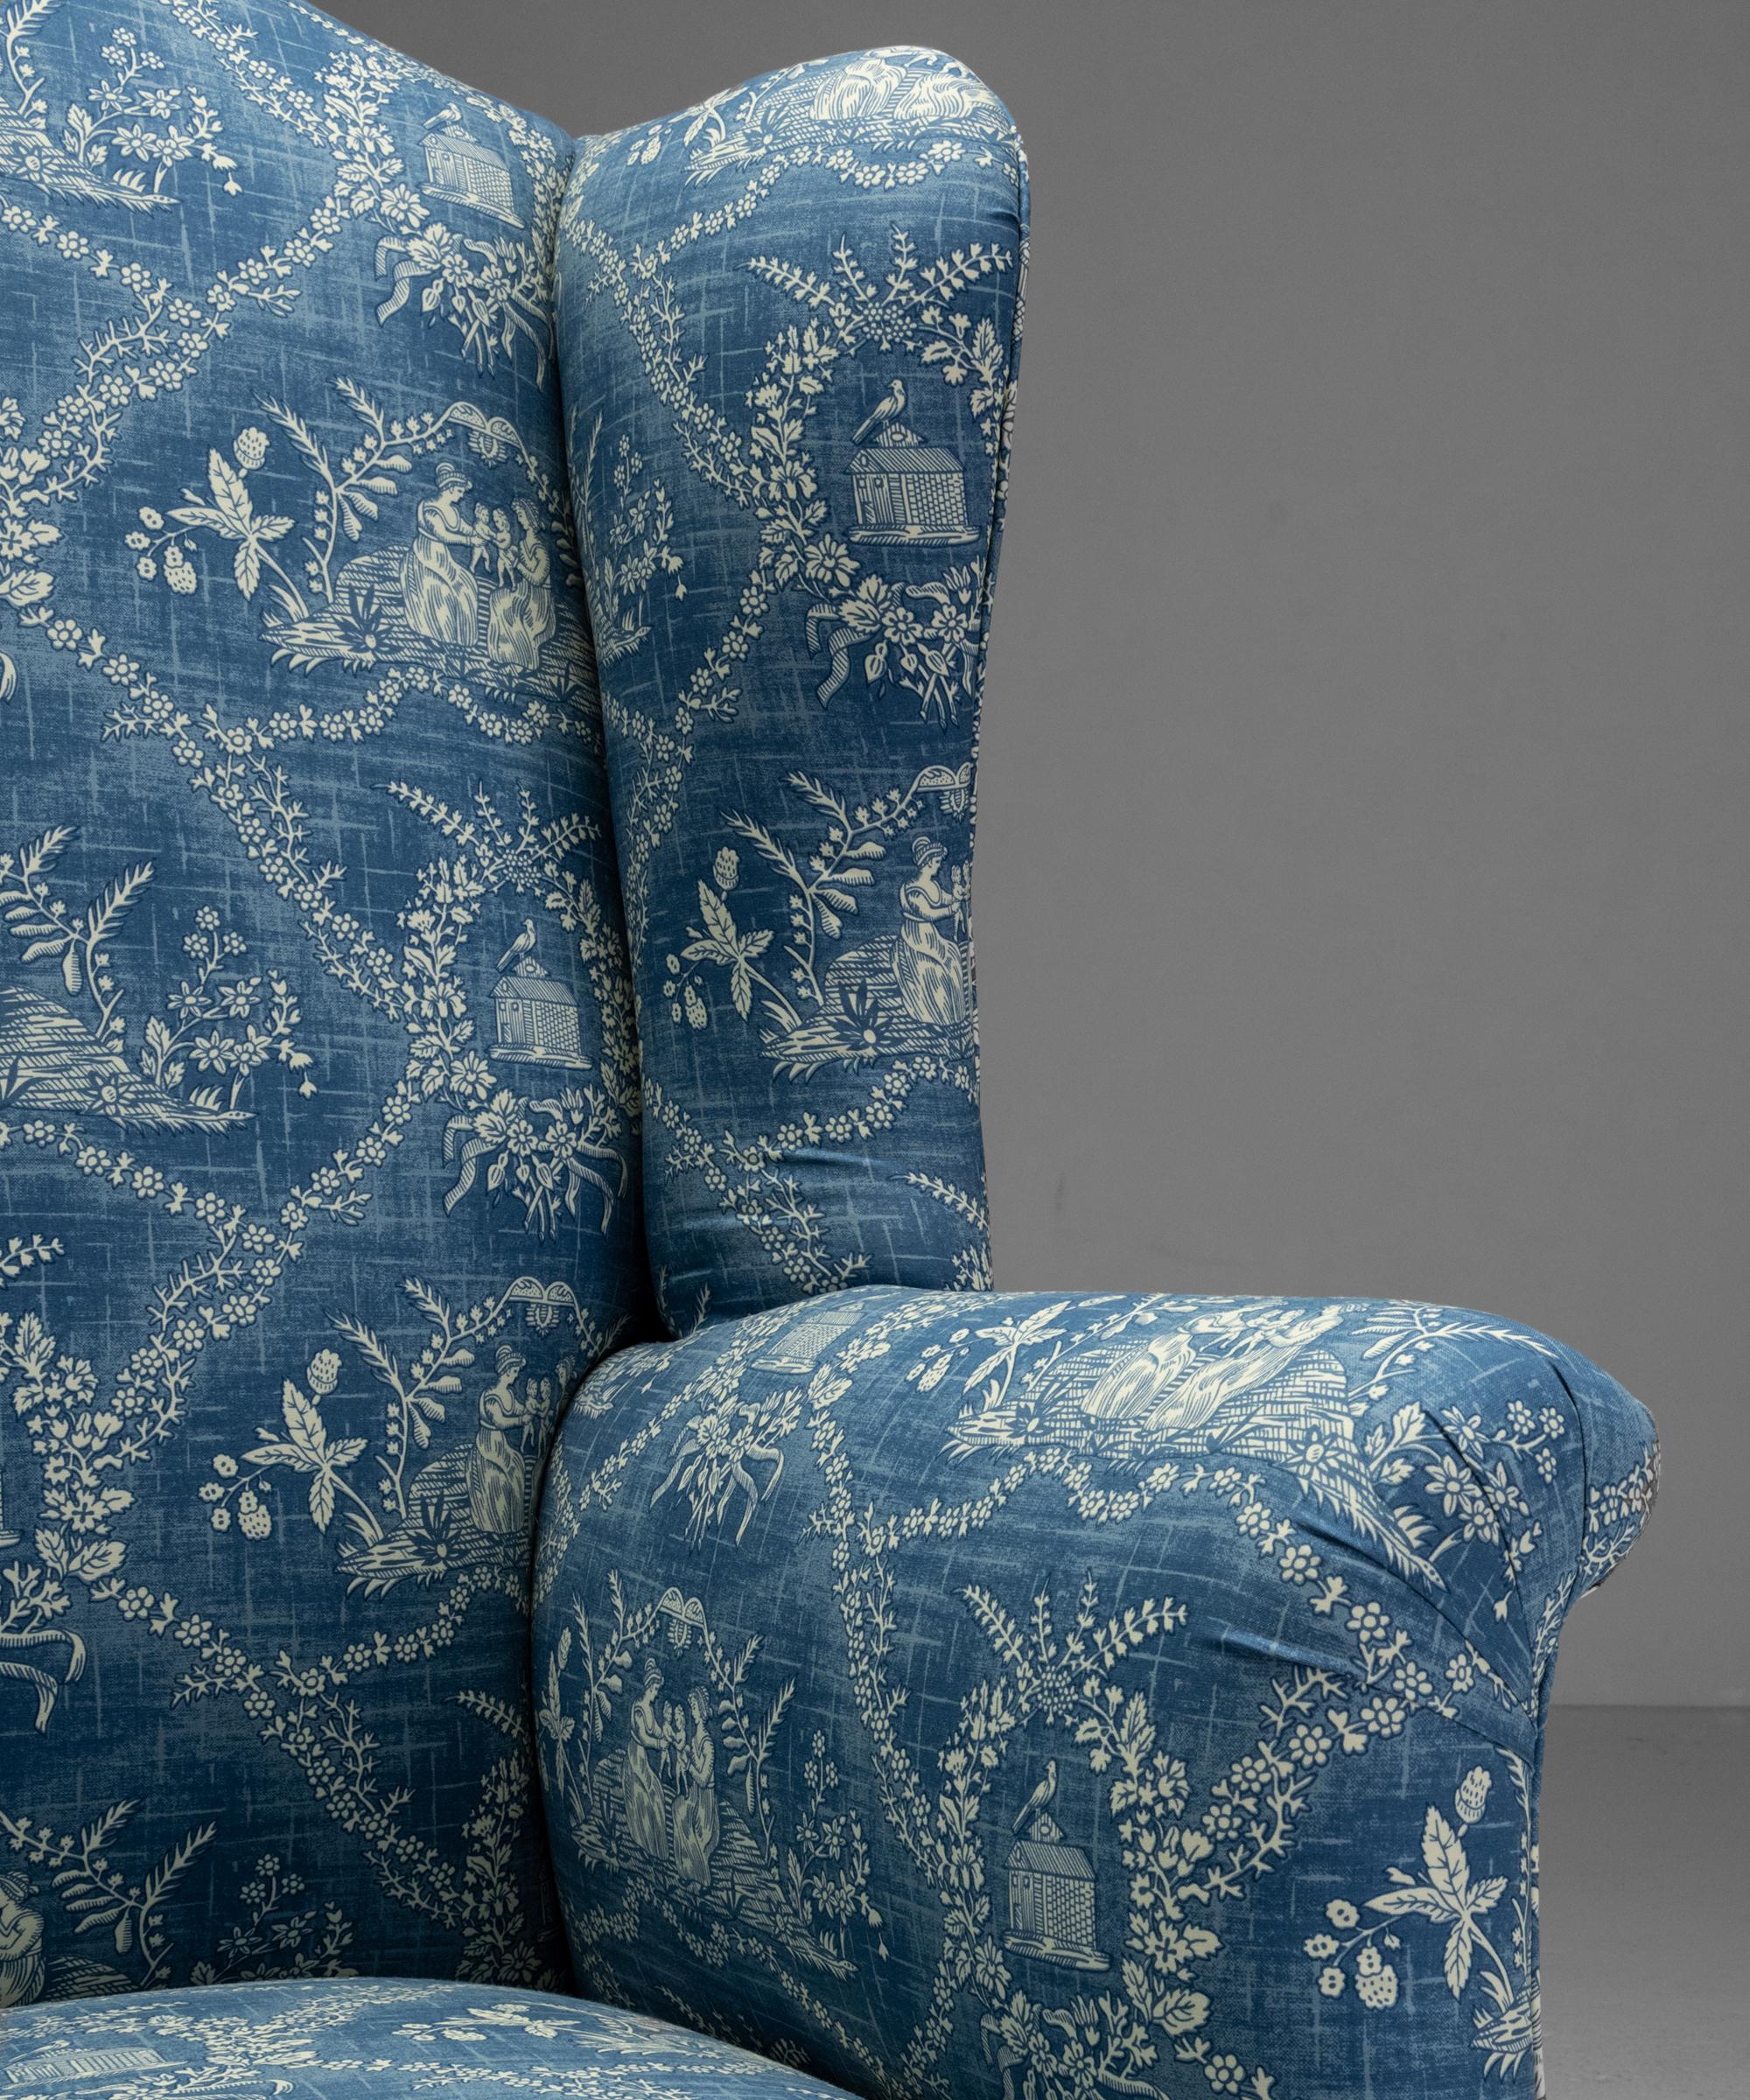 Georgian wingback armchair in 100% cotton toile fabric from Pierre Frey

England Circa 1770

Newly upholstered in Blue / Ivory Toile Fabric from Pierre Frey. On dark stained tapered wooden legs.

Measures: 28